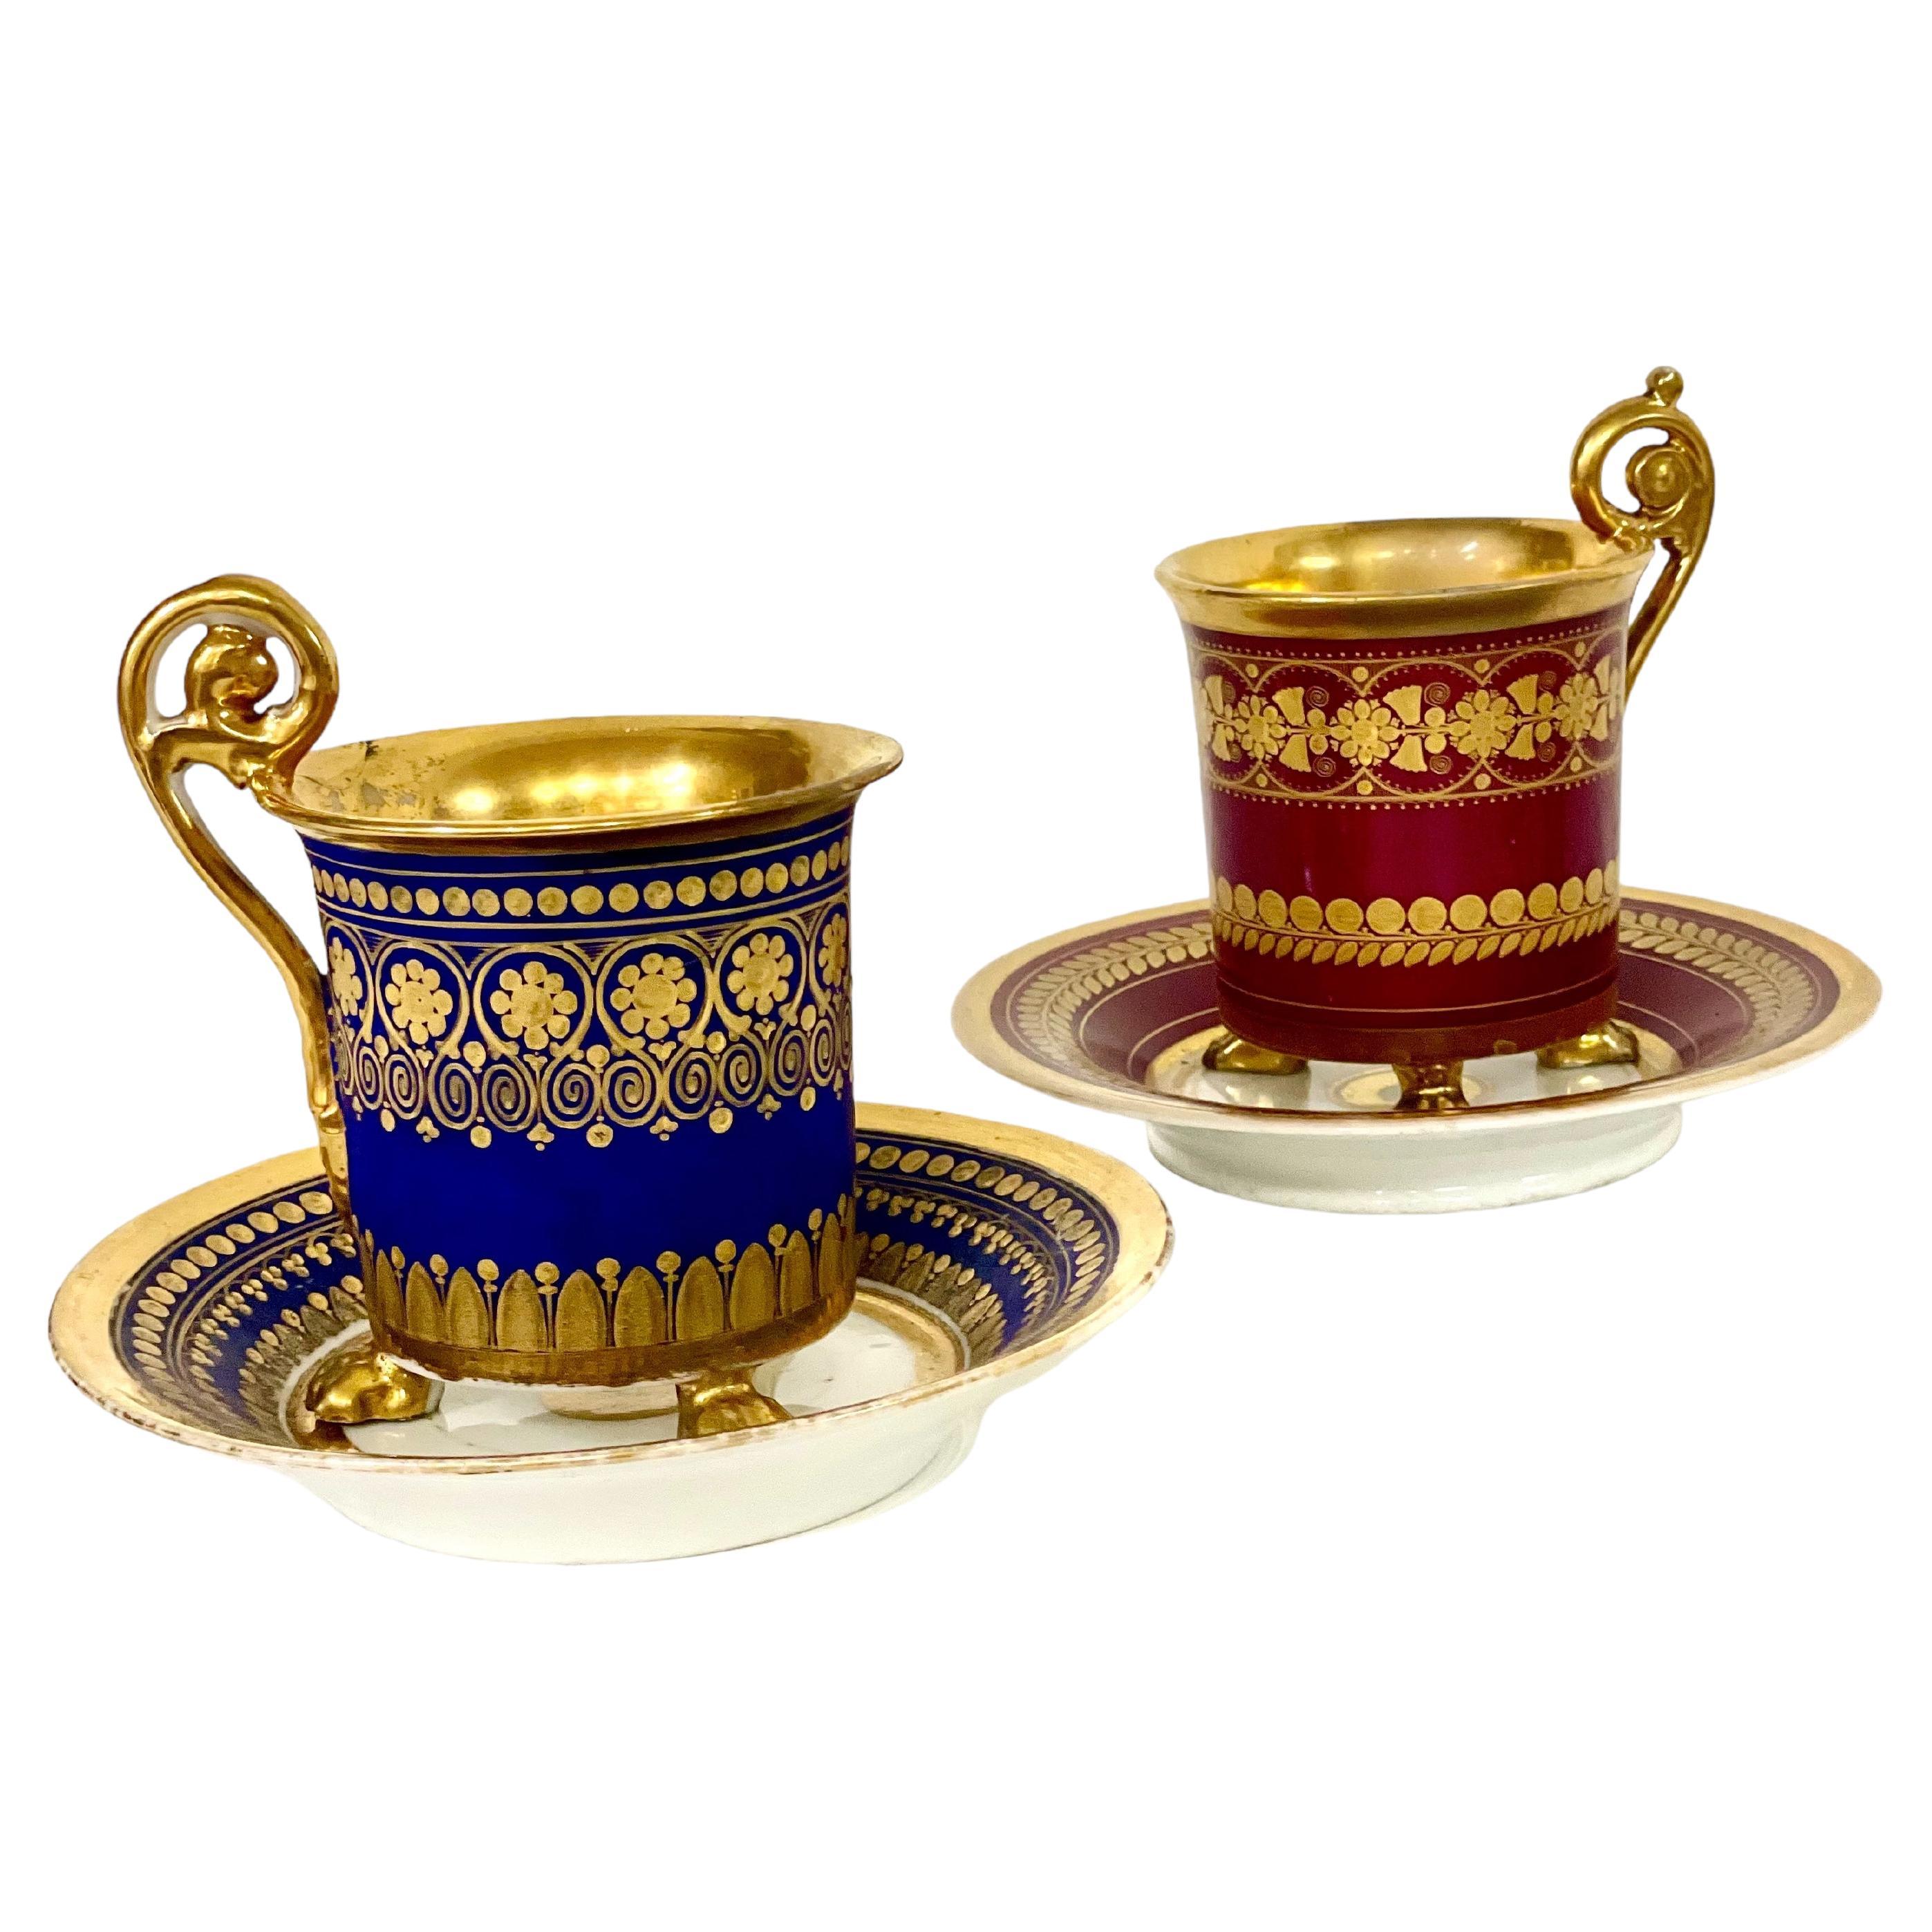 Pair of Paris Porcelain Three-Footed Gilded Coffee Cups. Empire Period